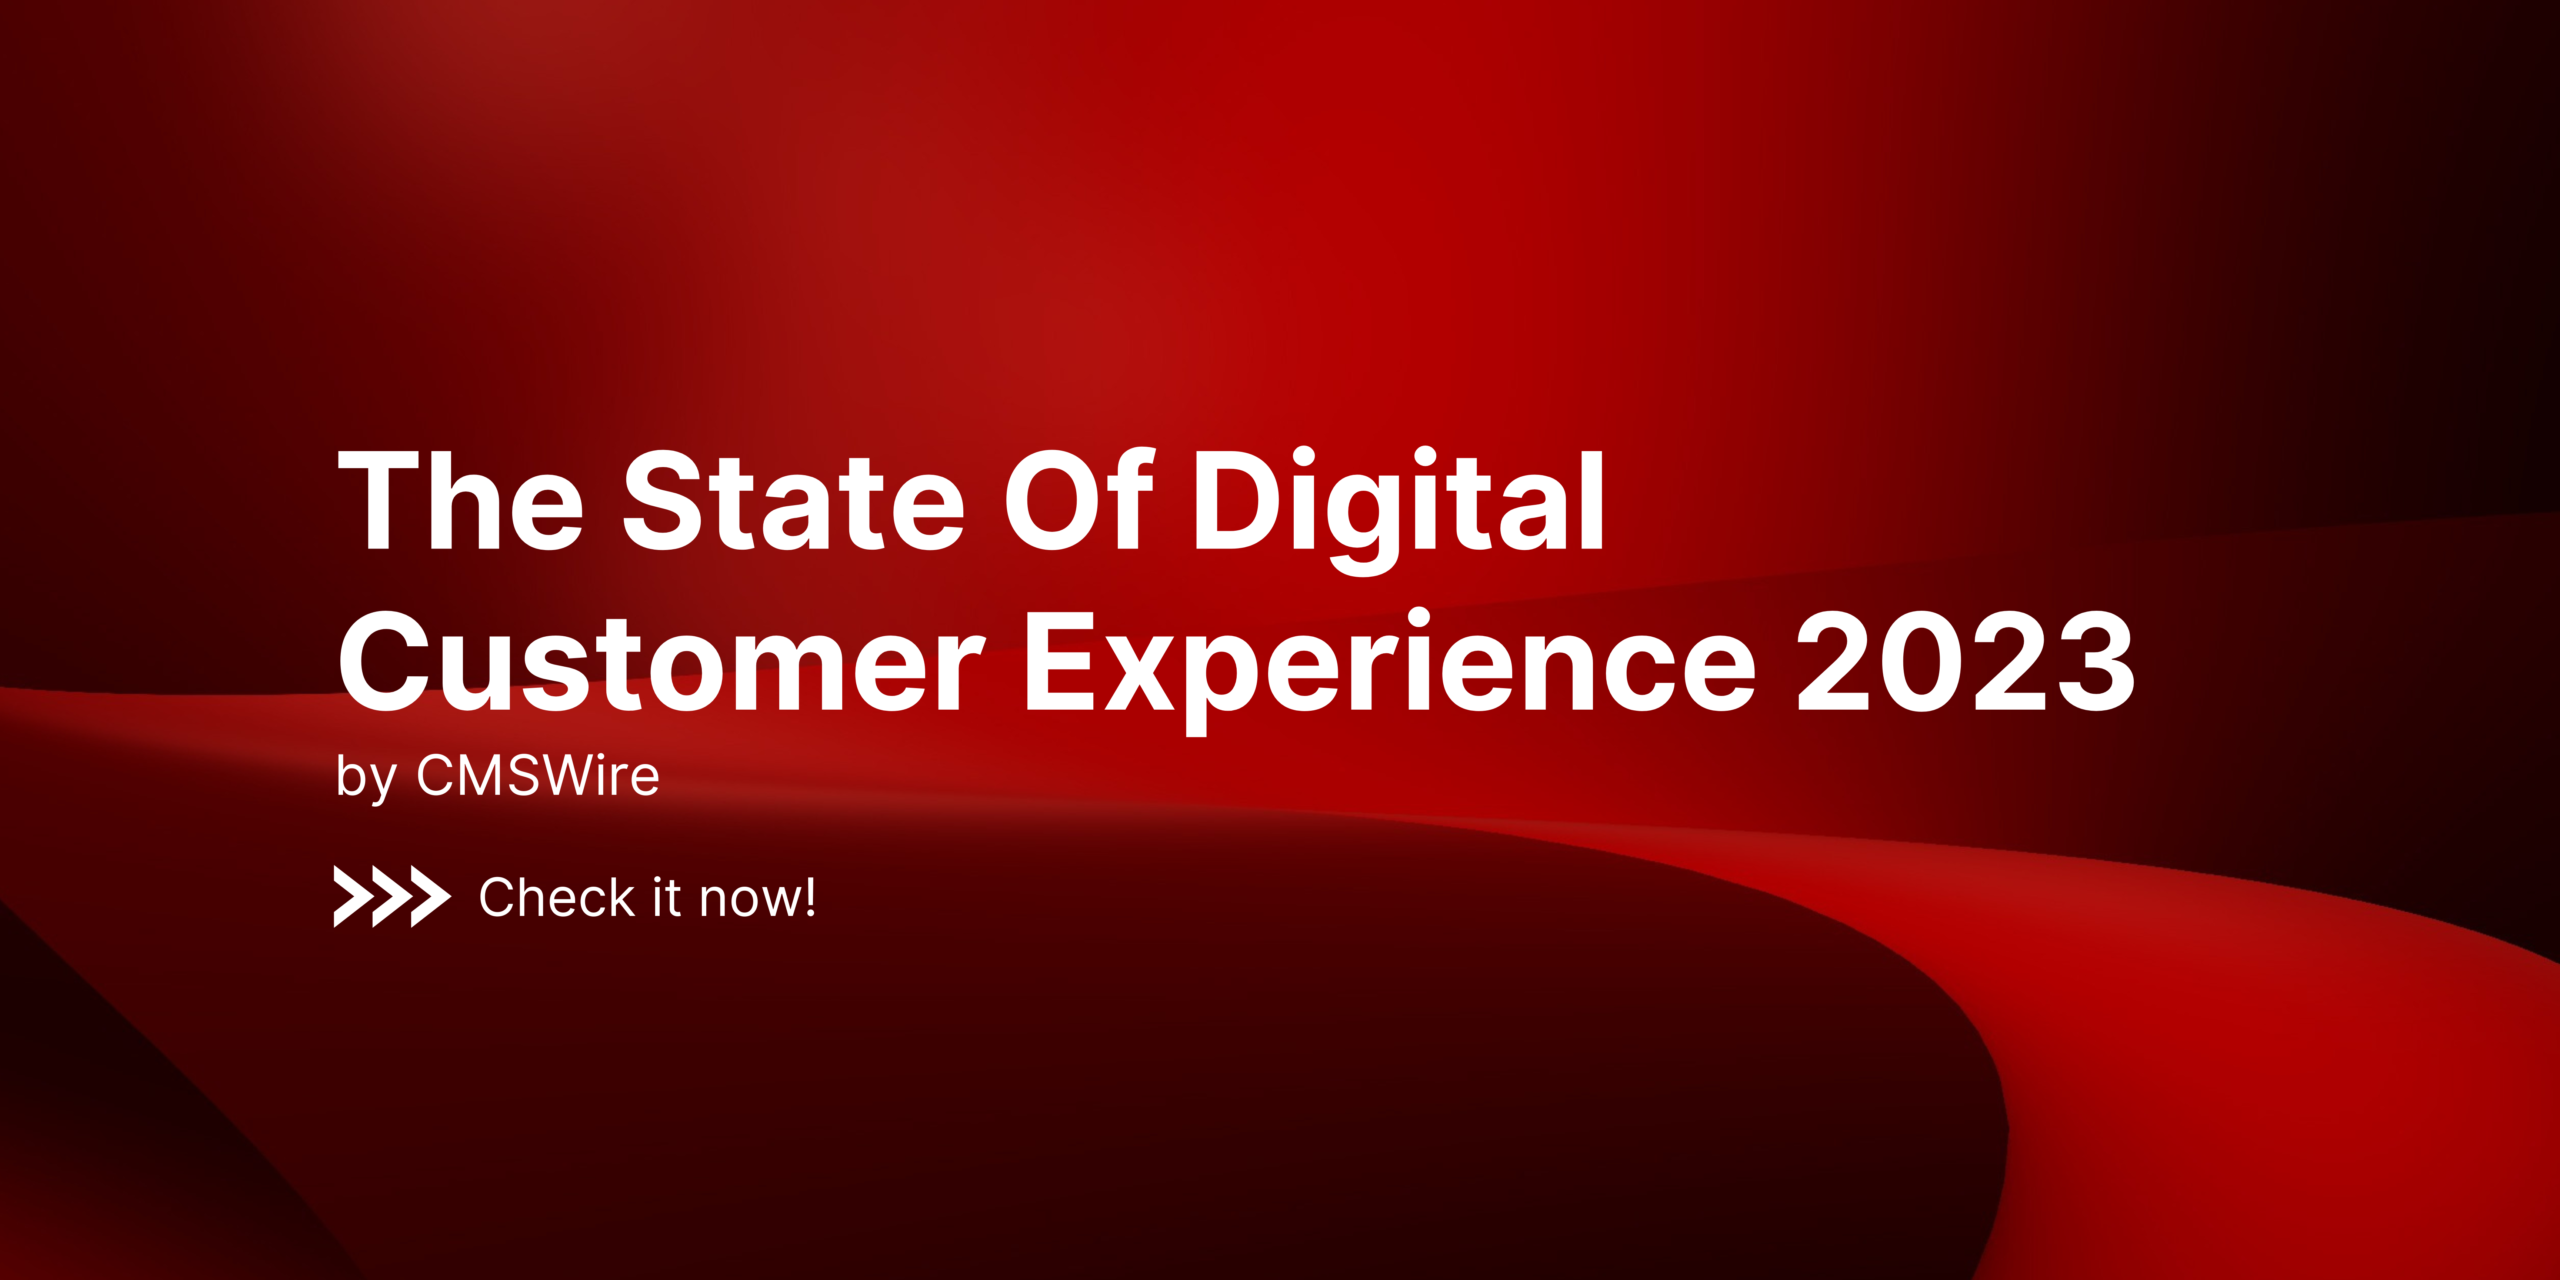 The State Of Digital Customer Experience 2023